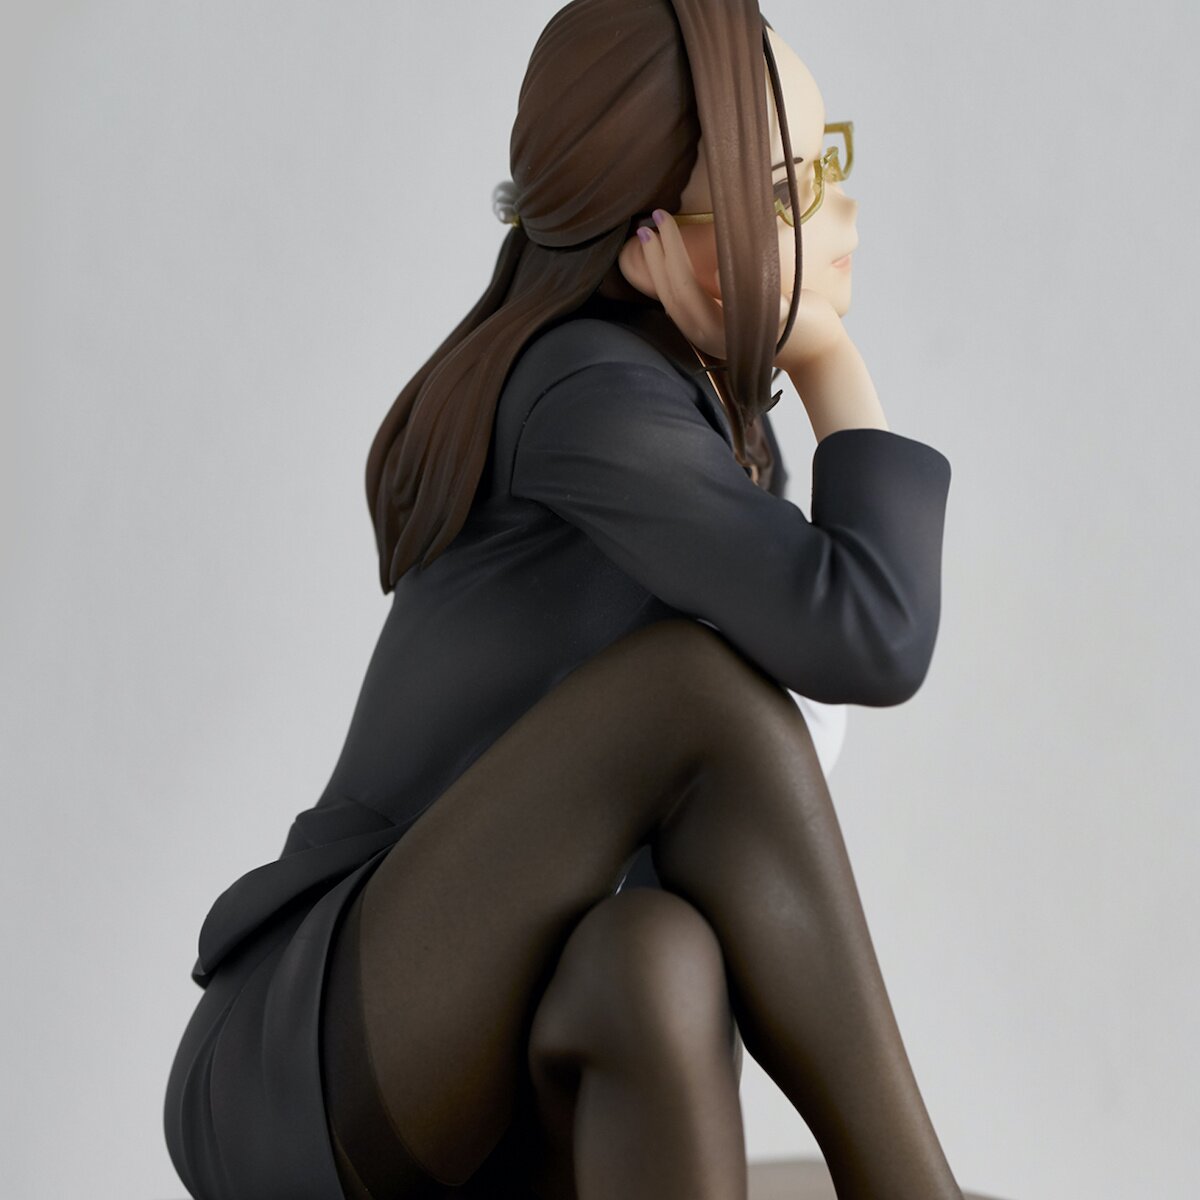 UNION CREATIVE Miru Tights May Disease? Can the Teacher Cure It? PVC & ABS